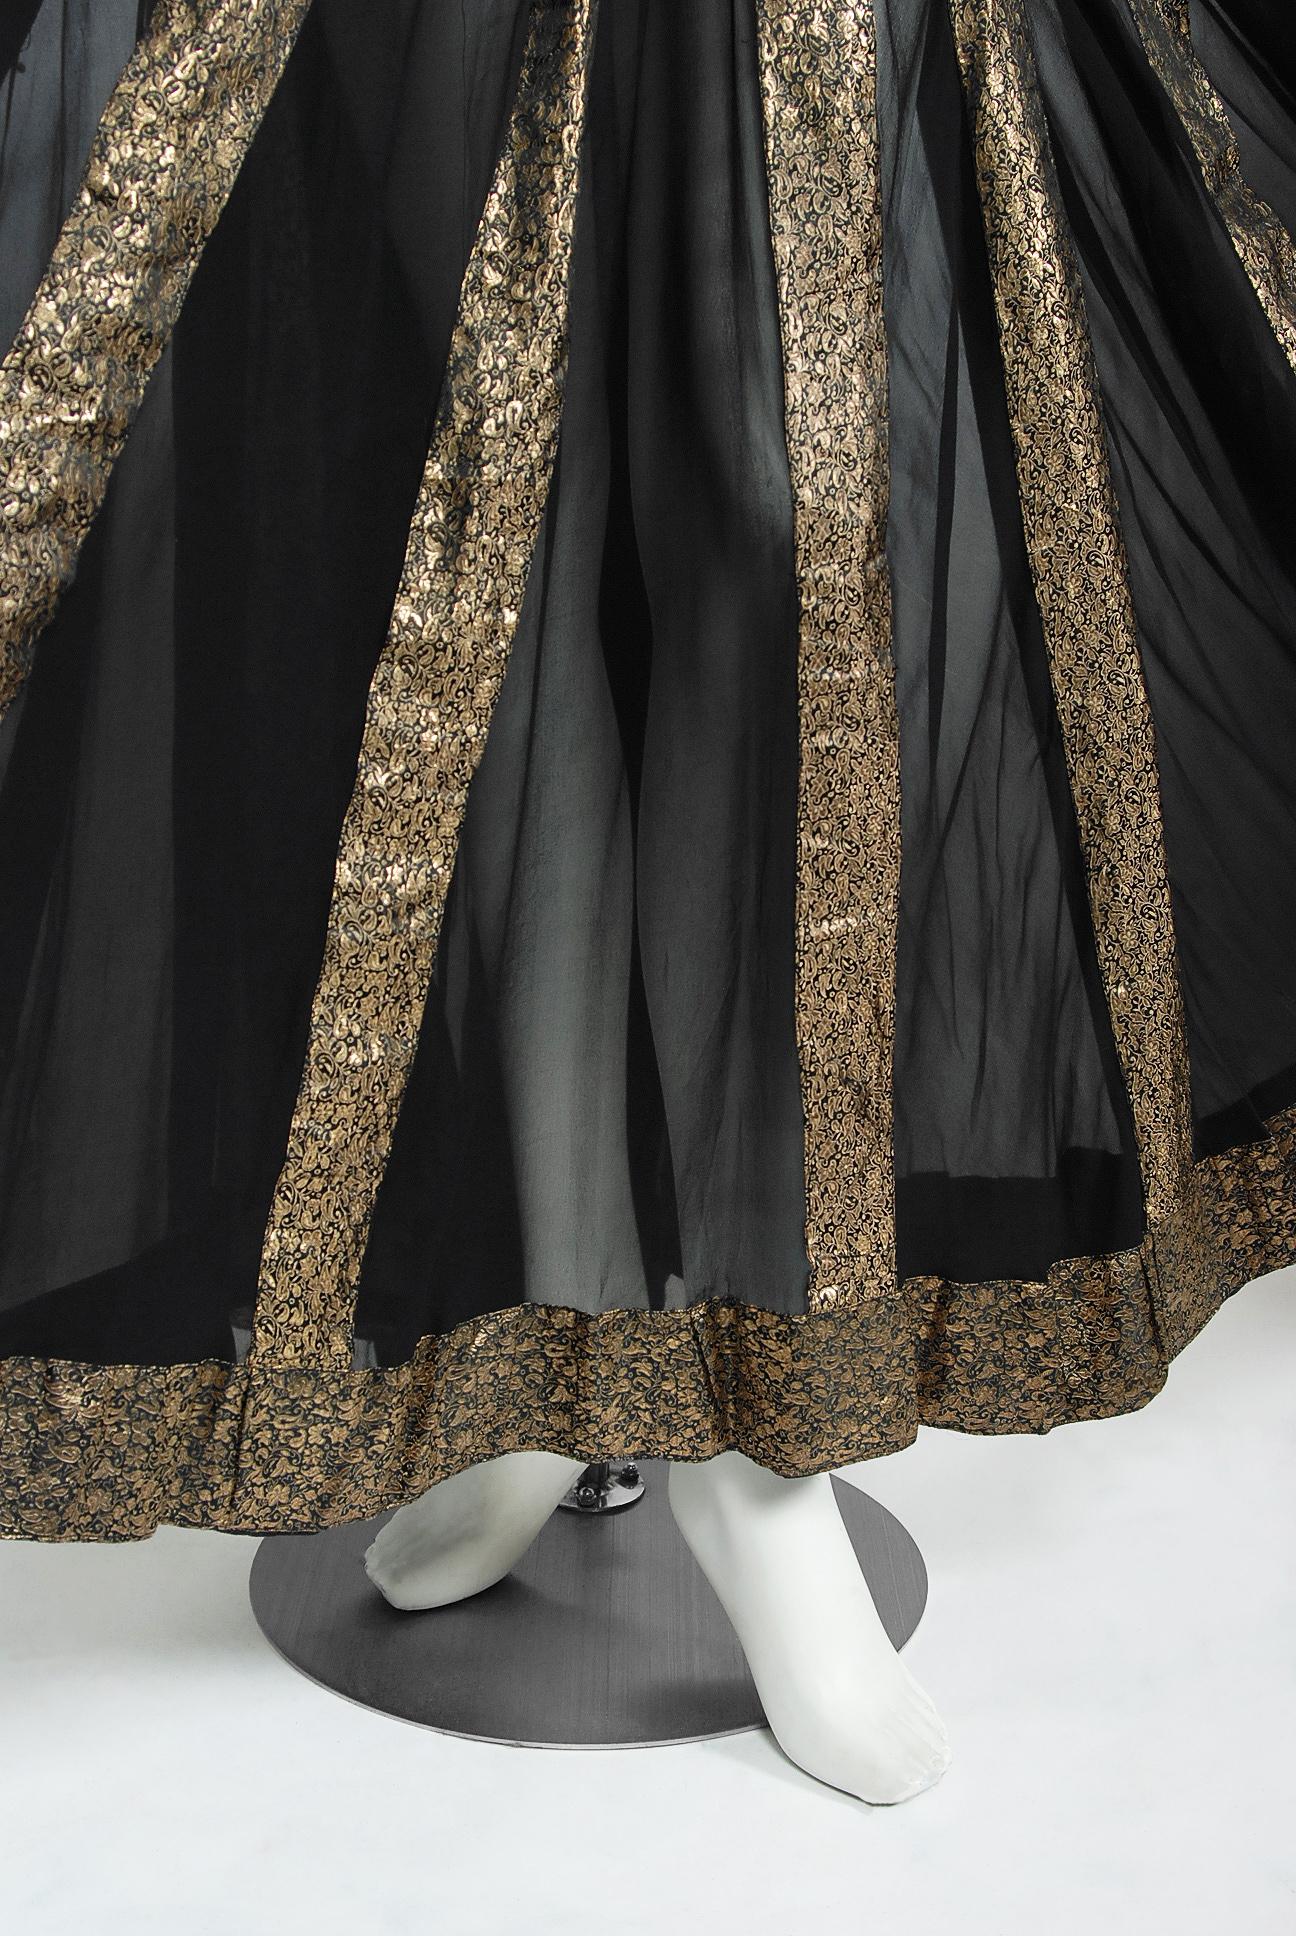 Women's Vintage 1970's Thea Porter Couture Gold Lamé and Black Sheer Silk Bohemian Skirt